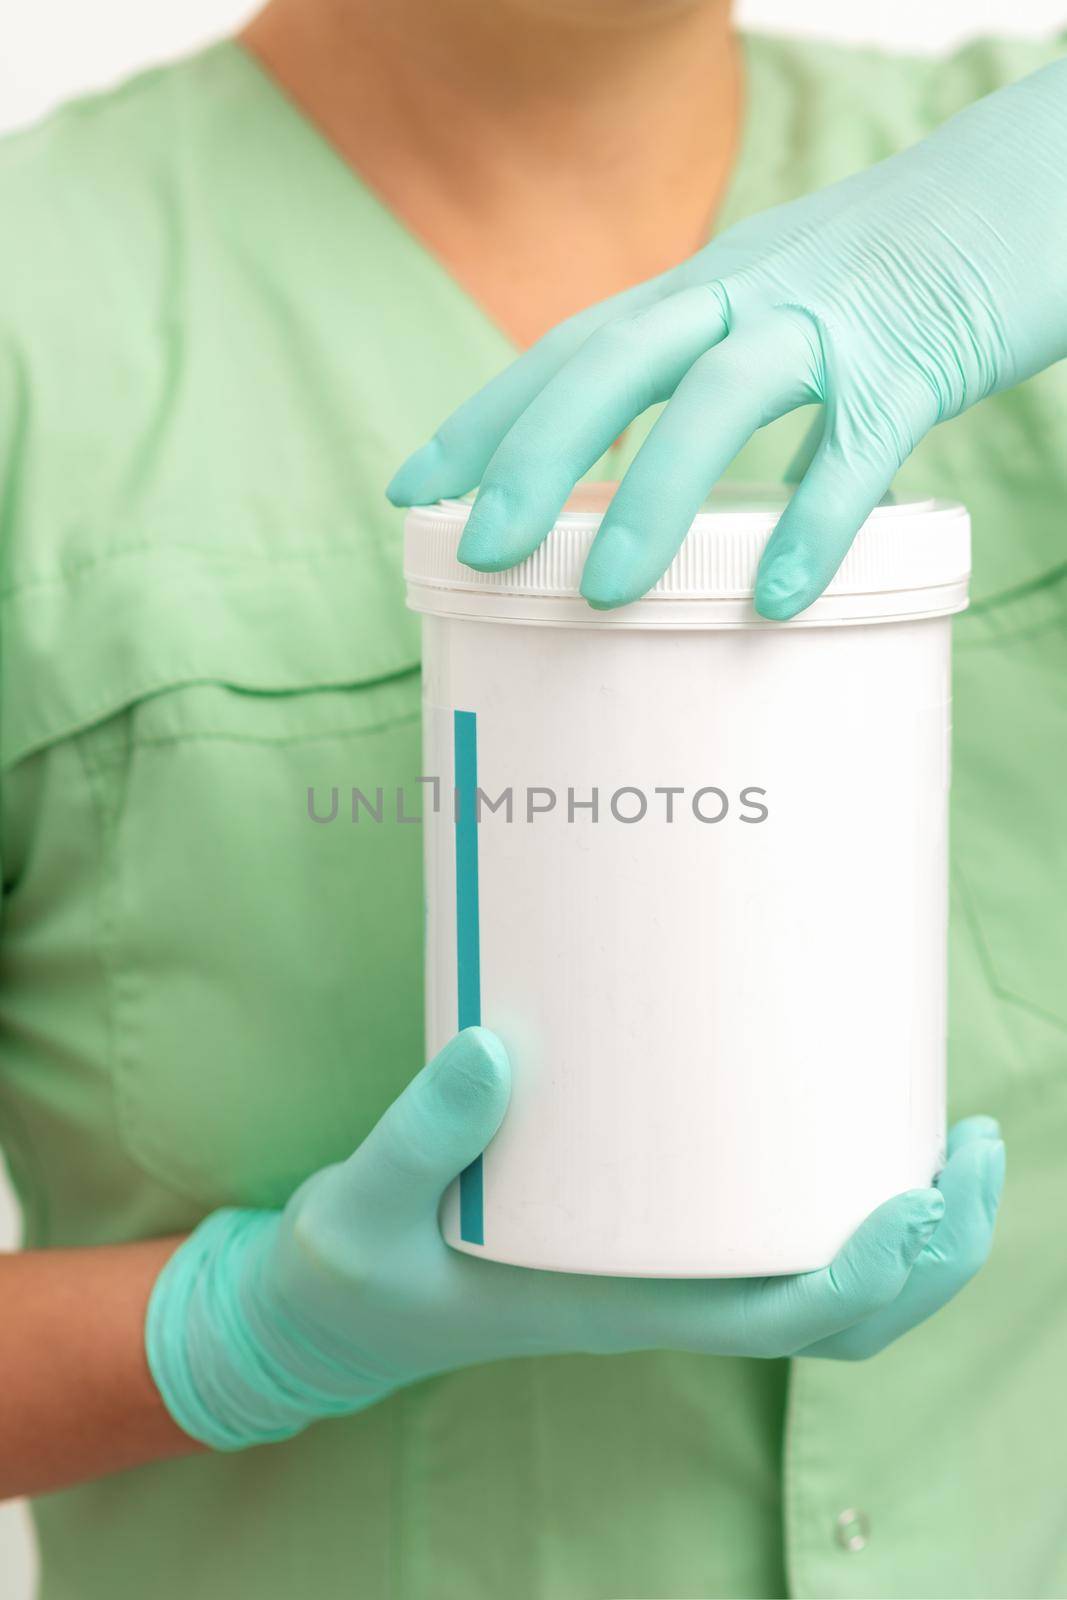 Hands in protective gloves of beautician open a white body cream jar on white background. by okskukuruza